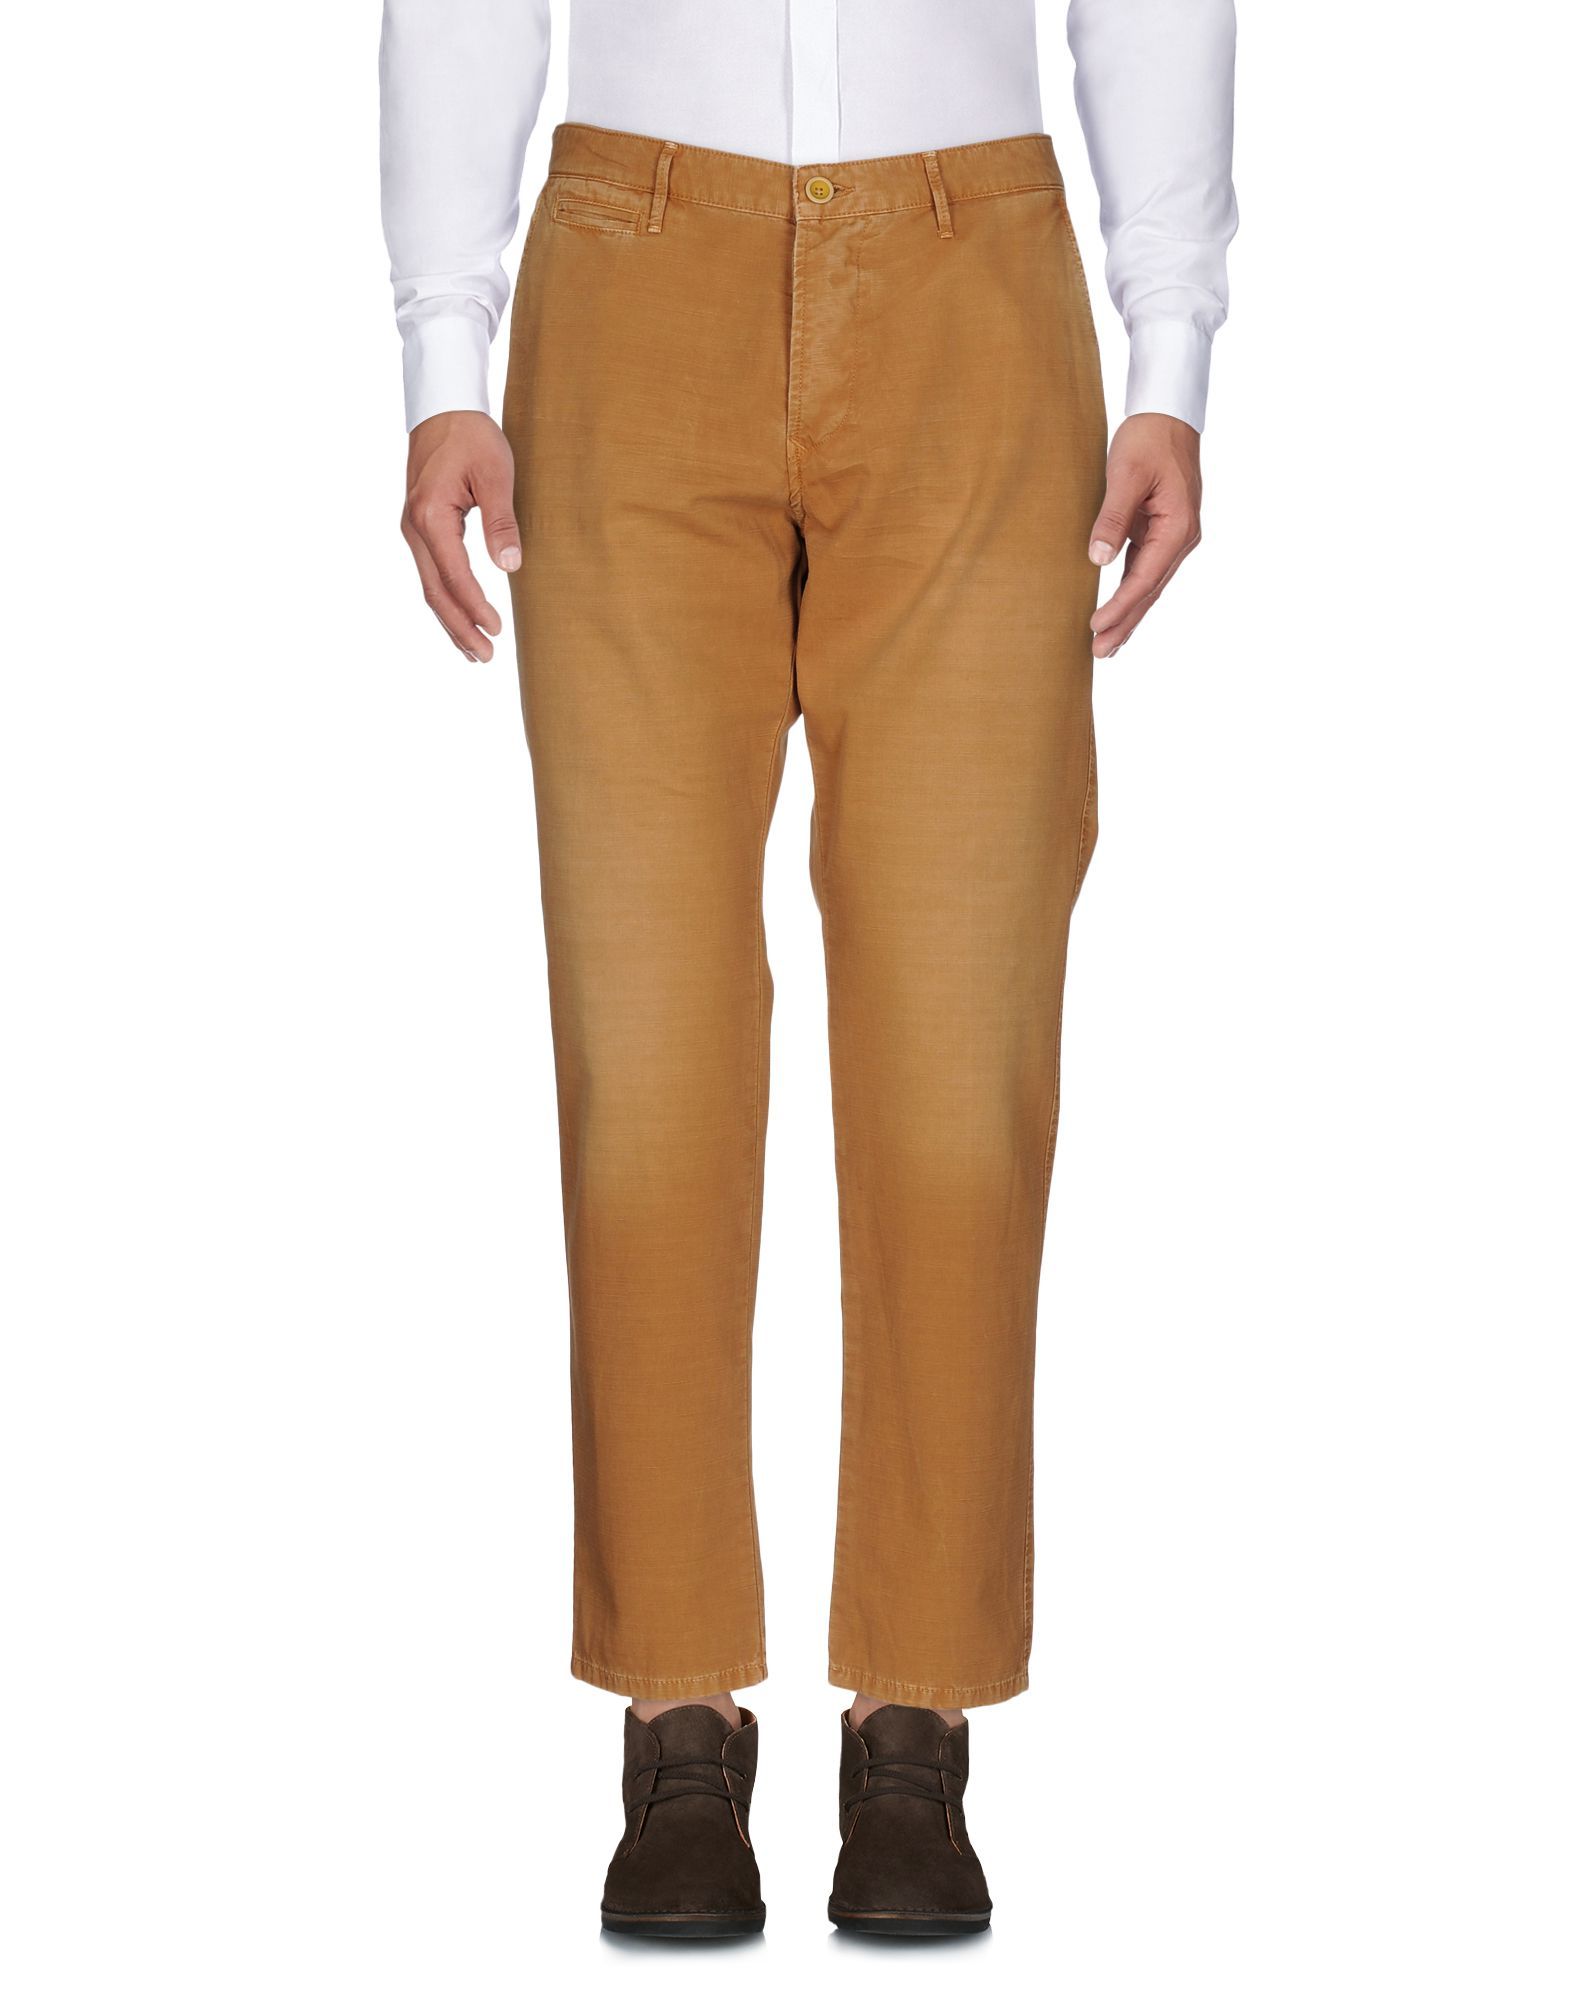 Plain weave<br>Faded<br>Solid colour<br>Mid Rise<br>Regular fit<br>Tapered leg<br>Logo<br>4 buttons<br>Multipockets<br>Chinos<br>